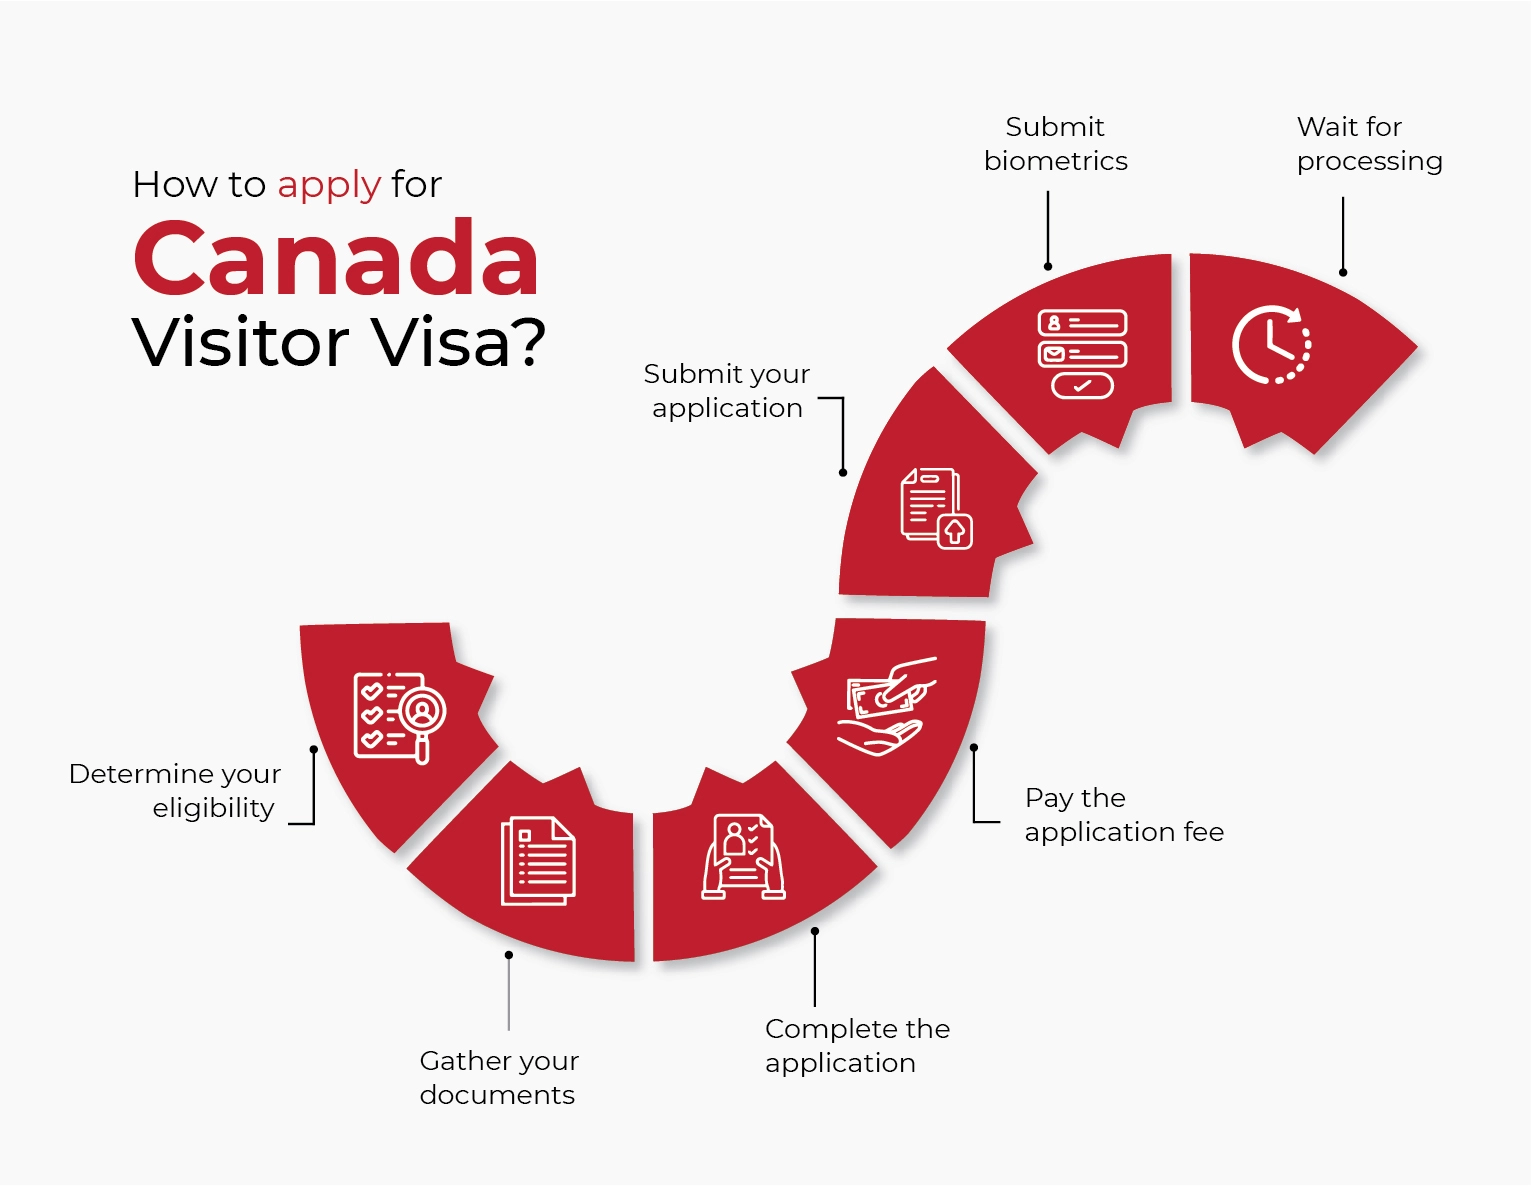 How to Apply for Canada Visitor Visa from India